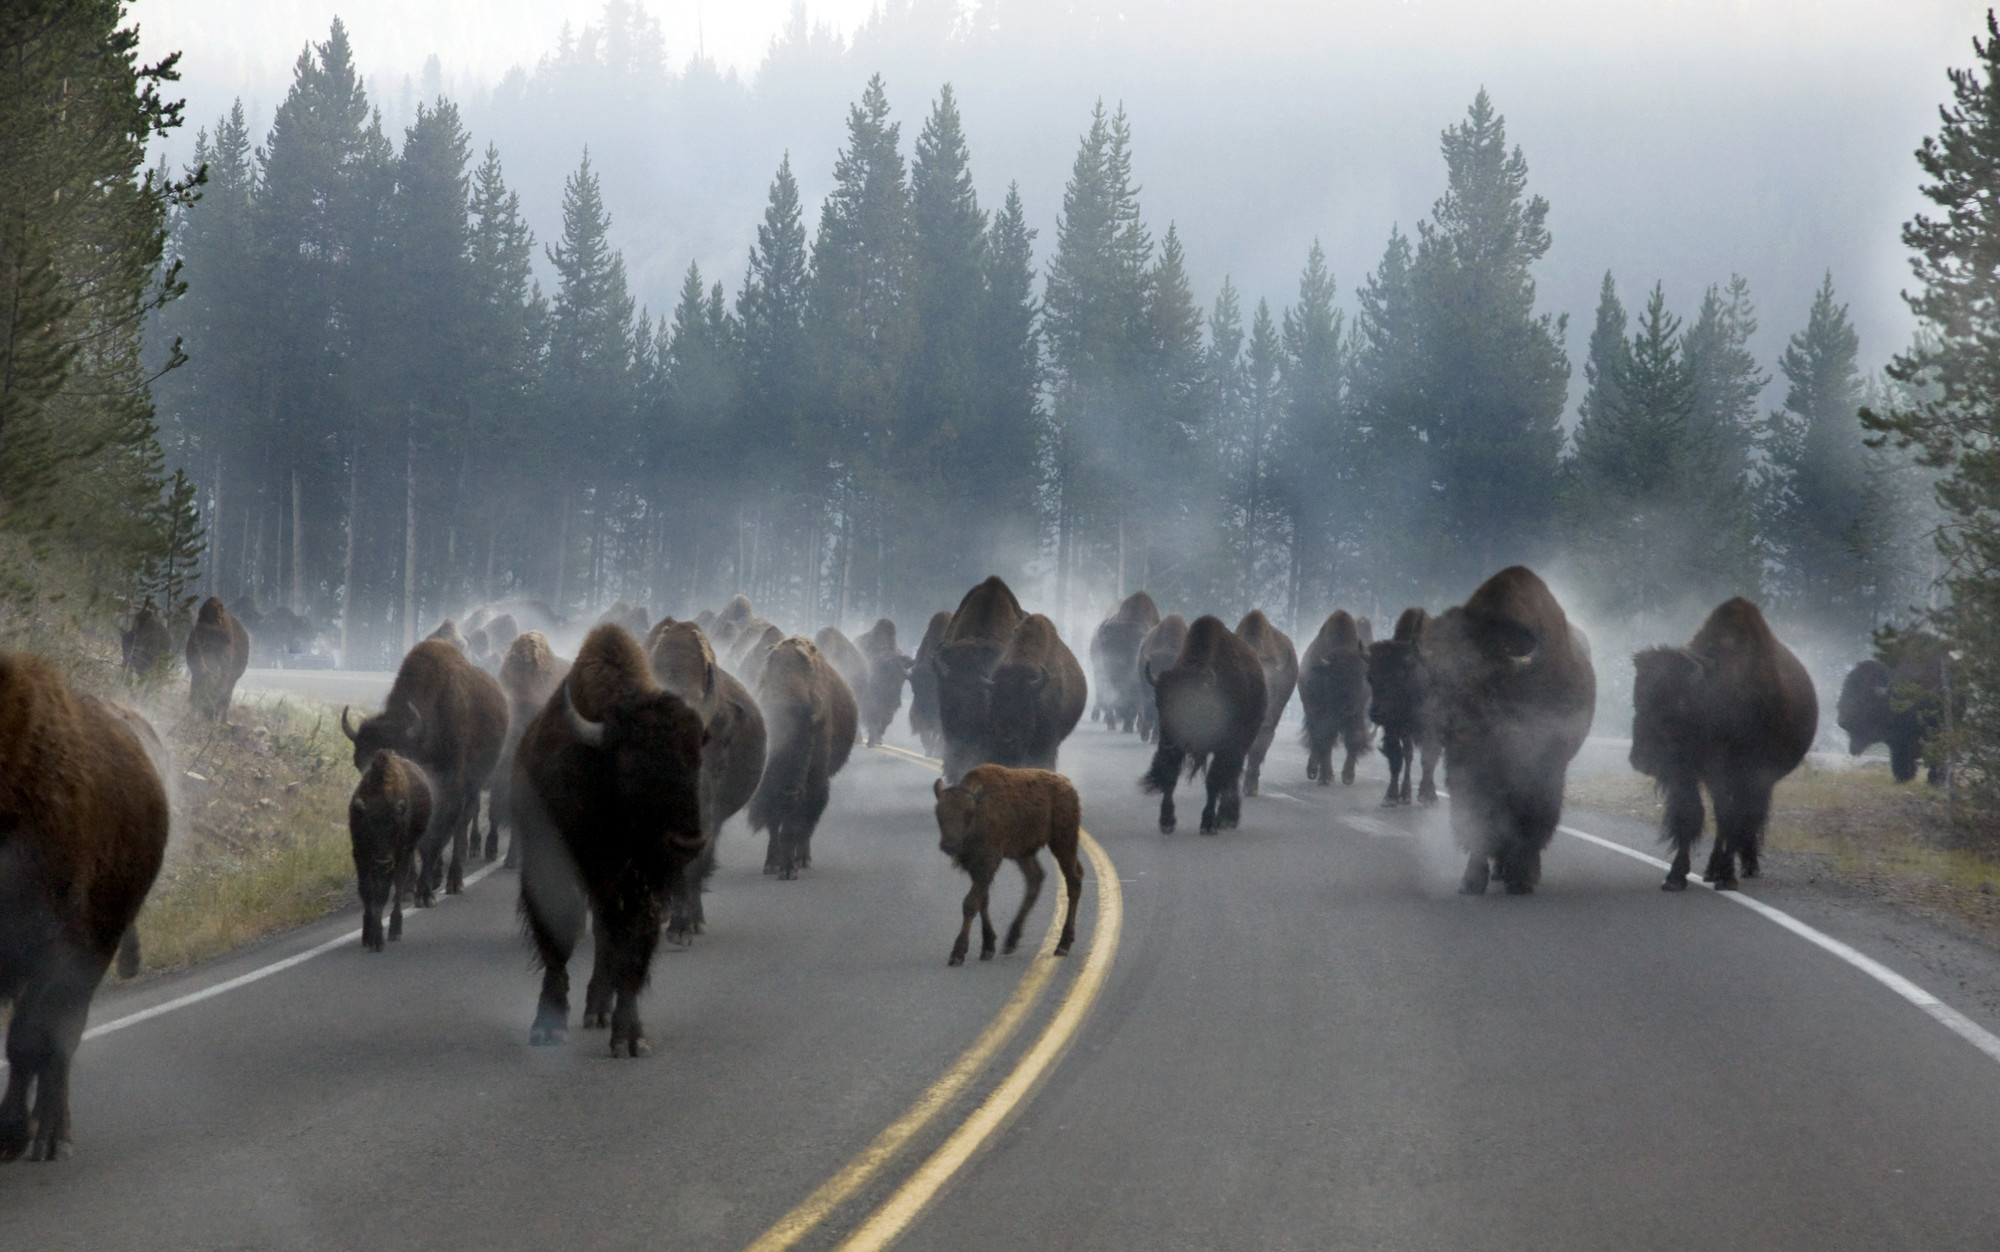 This is what rush hour looks like at Yellowstone National Park.